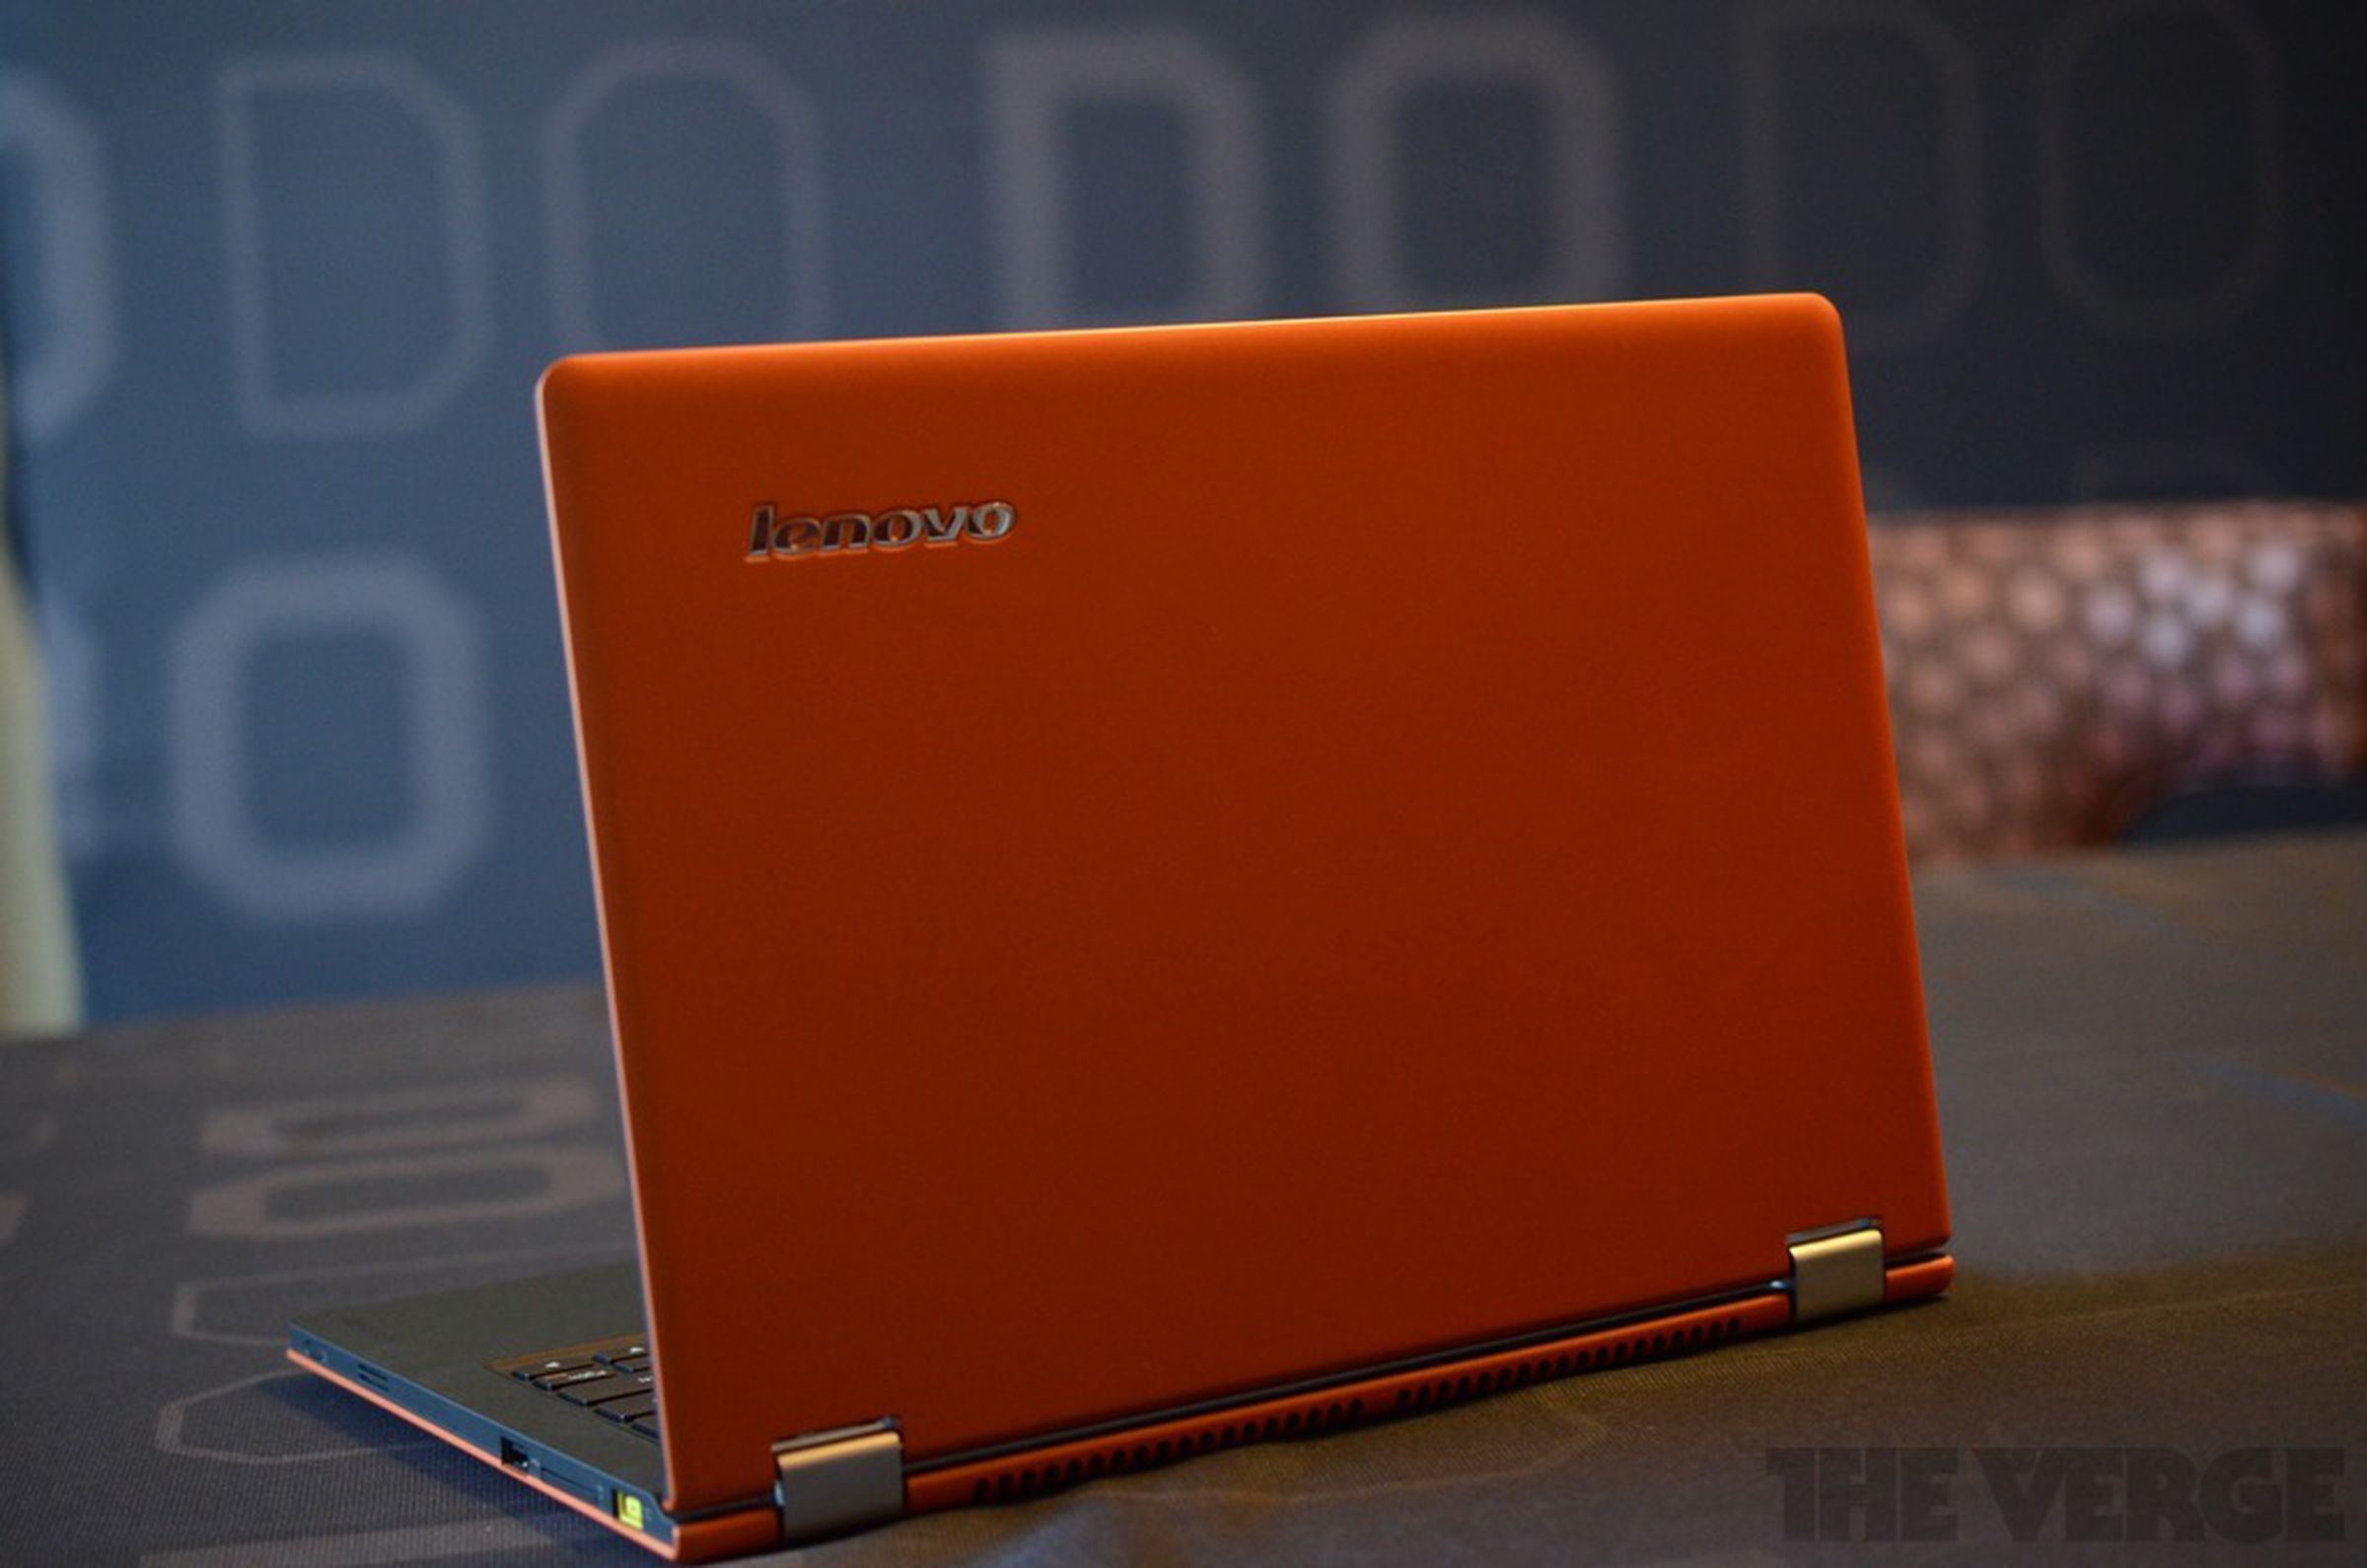 Lenovo IdeaPad Yoga 11S hands-on pictures